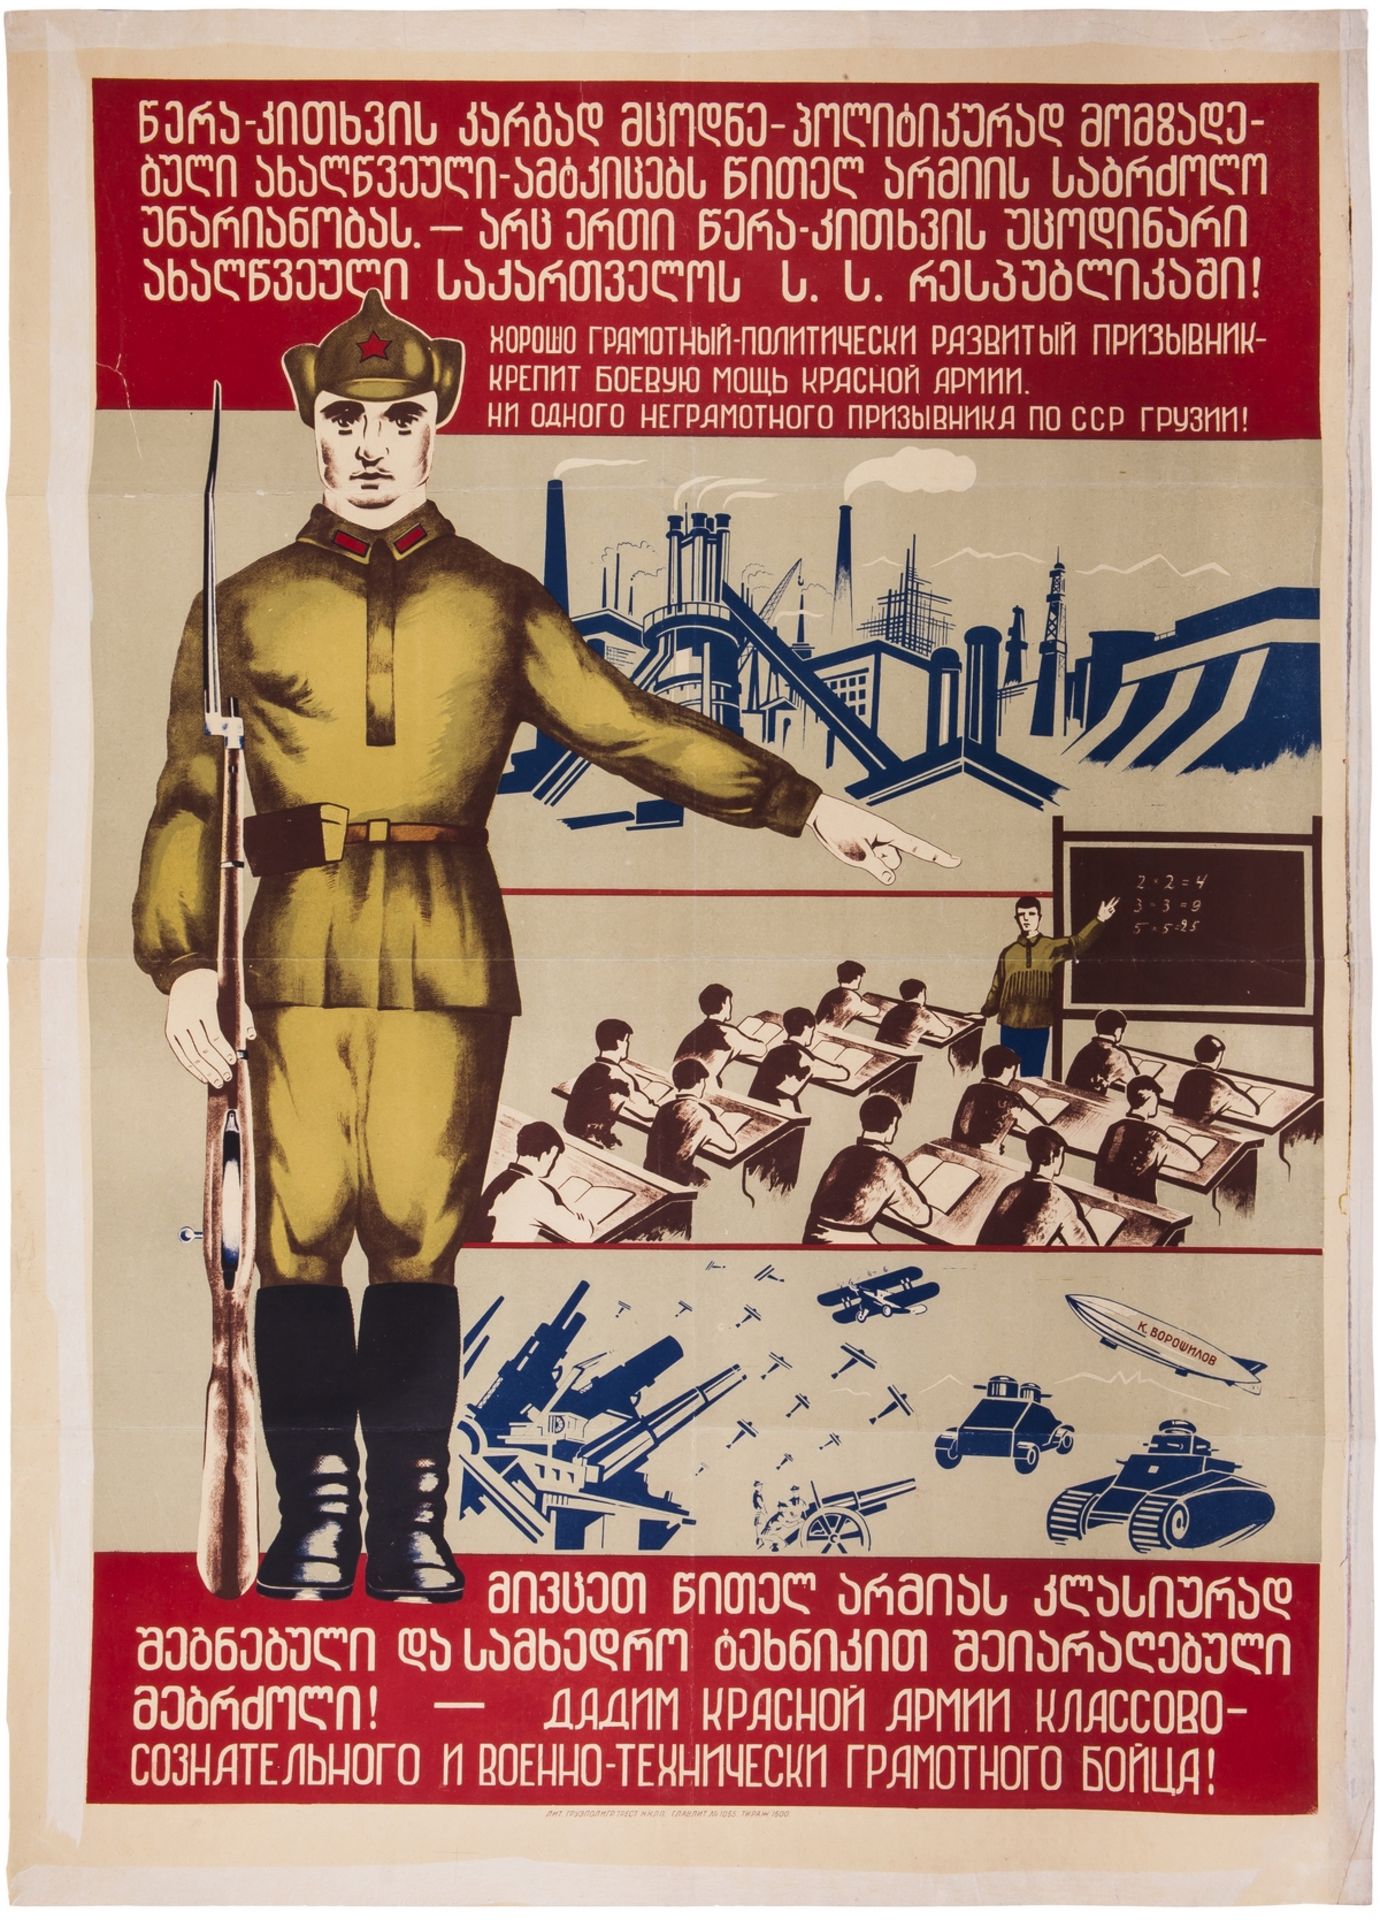 [Soviet]. Rare. "Poster Let's give class-conscious and military educated soldier to the Red Army". T